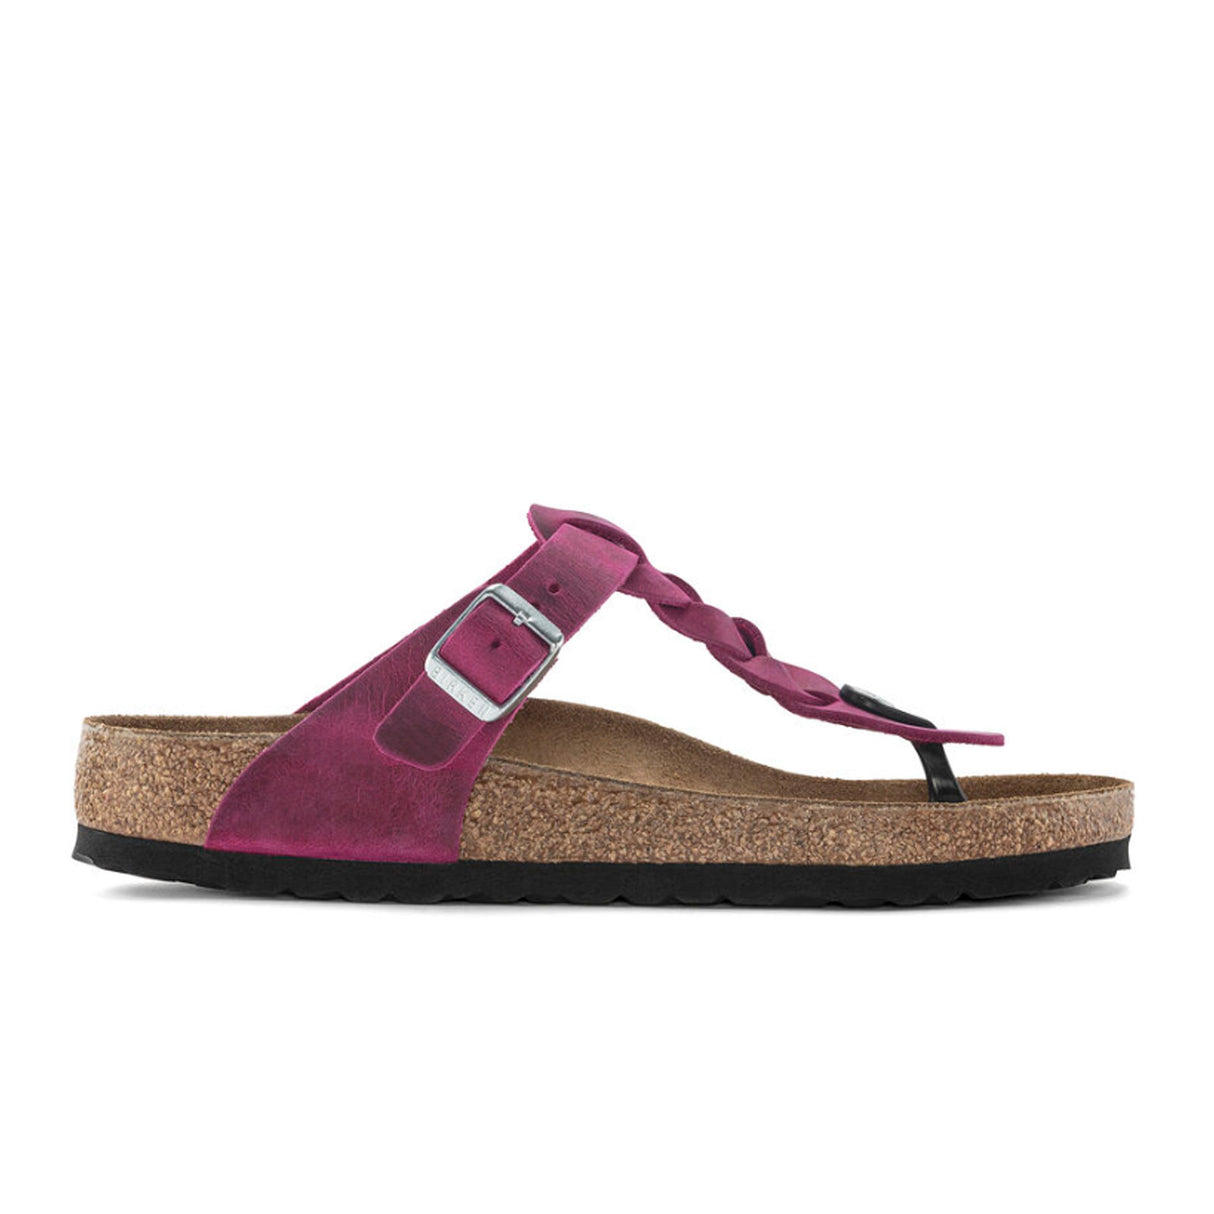 Birkenstock Gizeh Thong Sandal (Women) - Festival Fuchsia Oiled Leather Sandals - Thong - The Heel Shoe Fitters